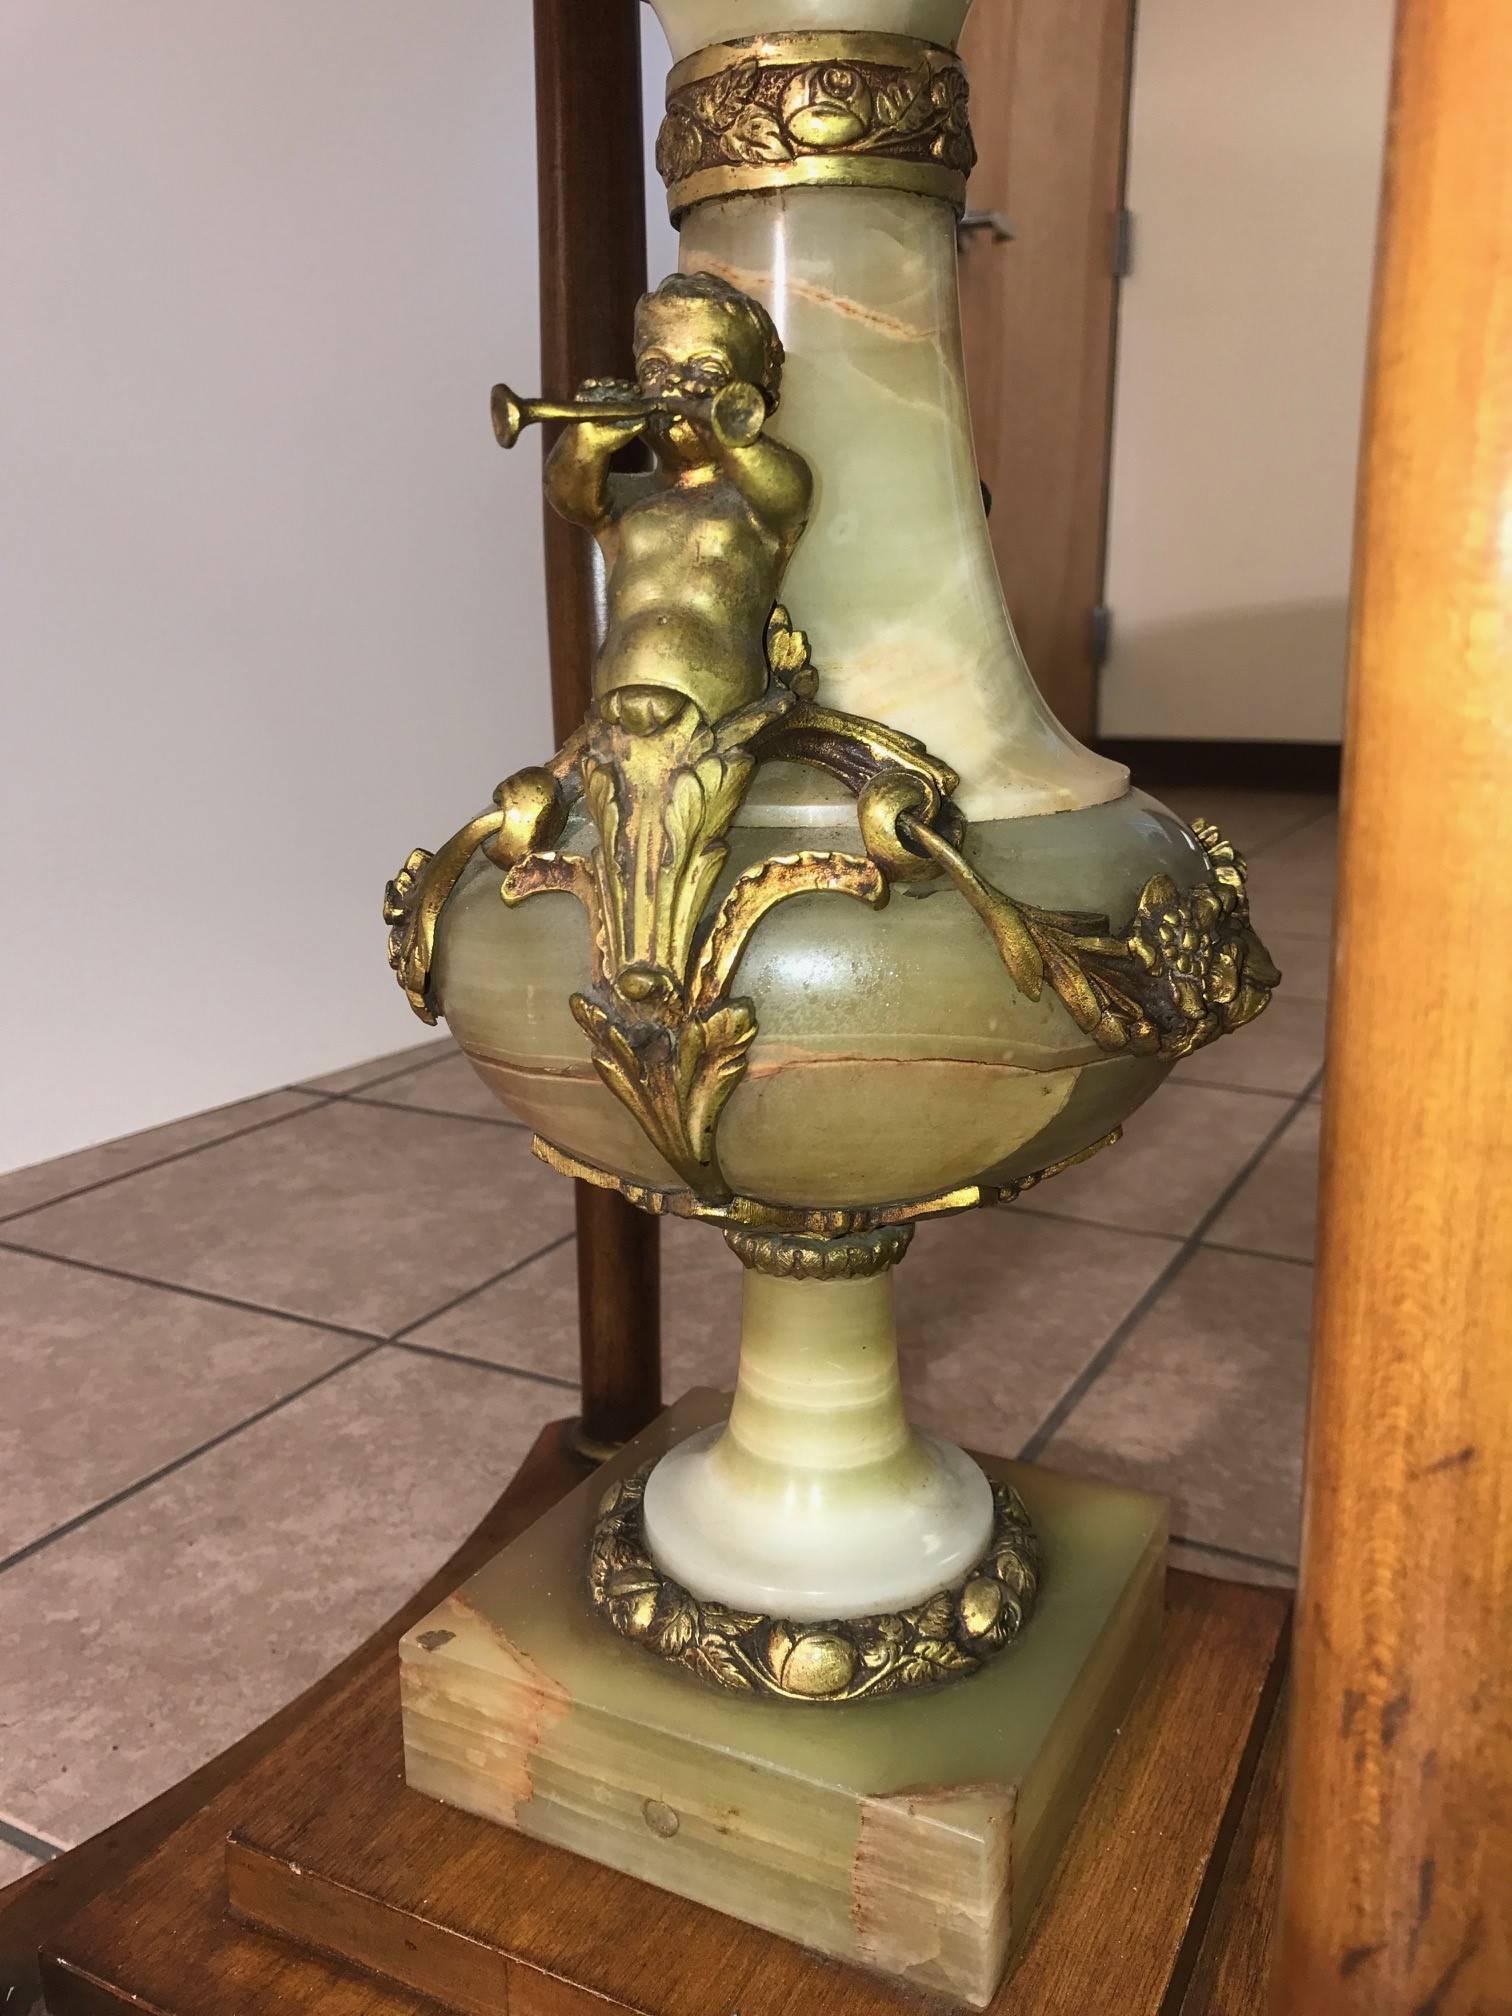 Stunning antique Italian center table with a marble top, onyx pedestal with bronze cherubs. The table has a wood base and is well designed table.